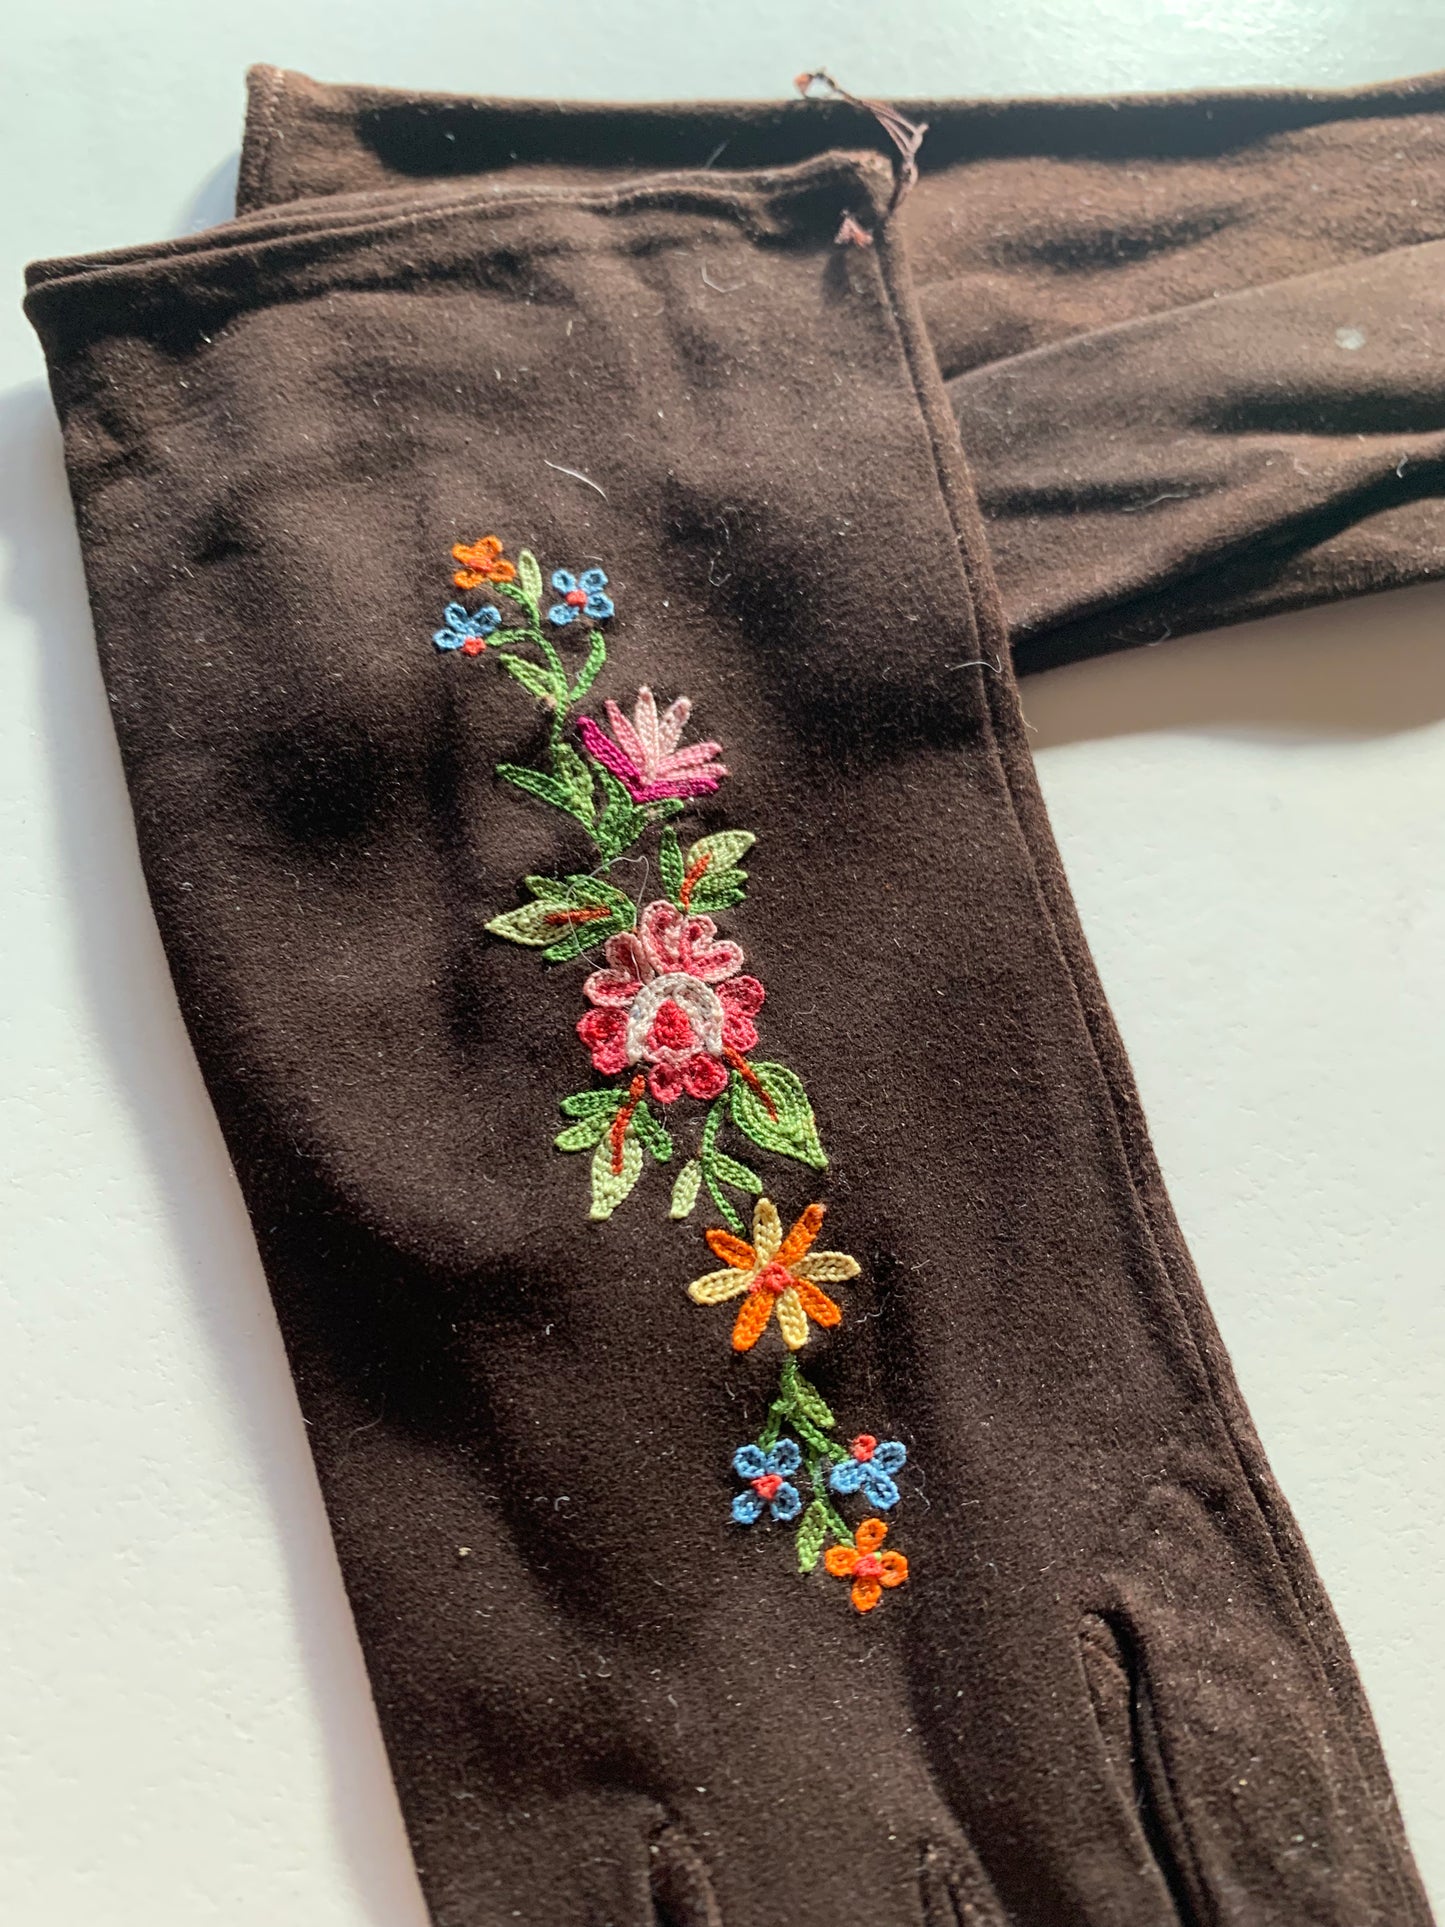 Cocoa Floral n Embroidered Leather Gloves circa 1950s